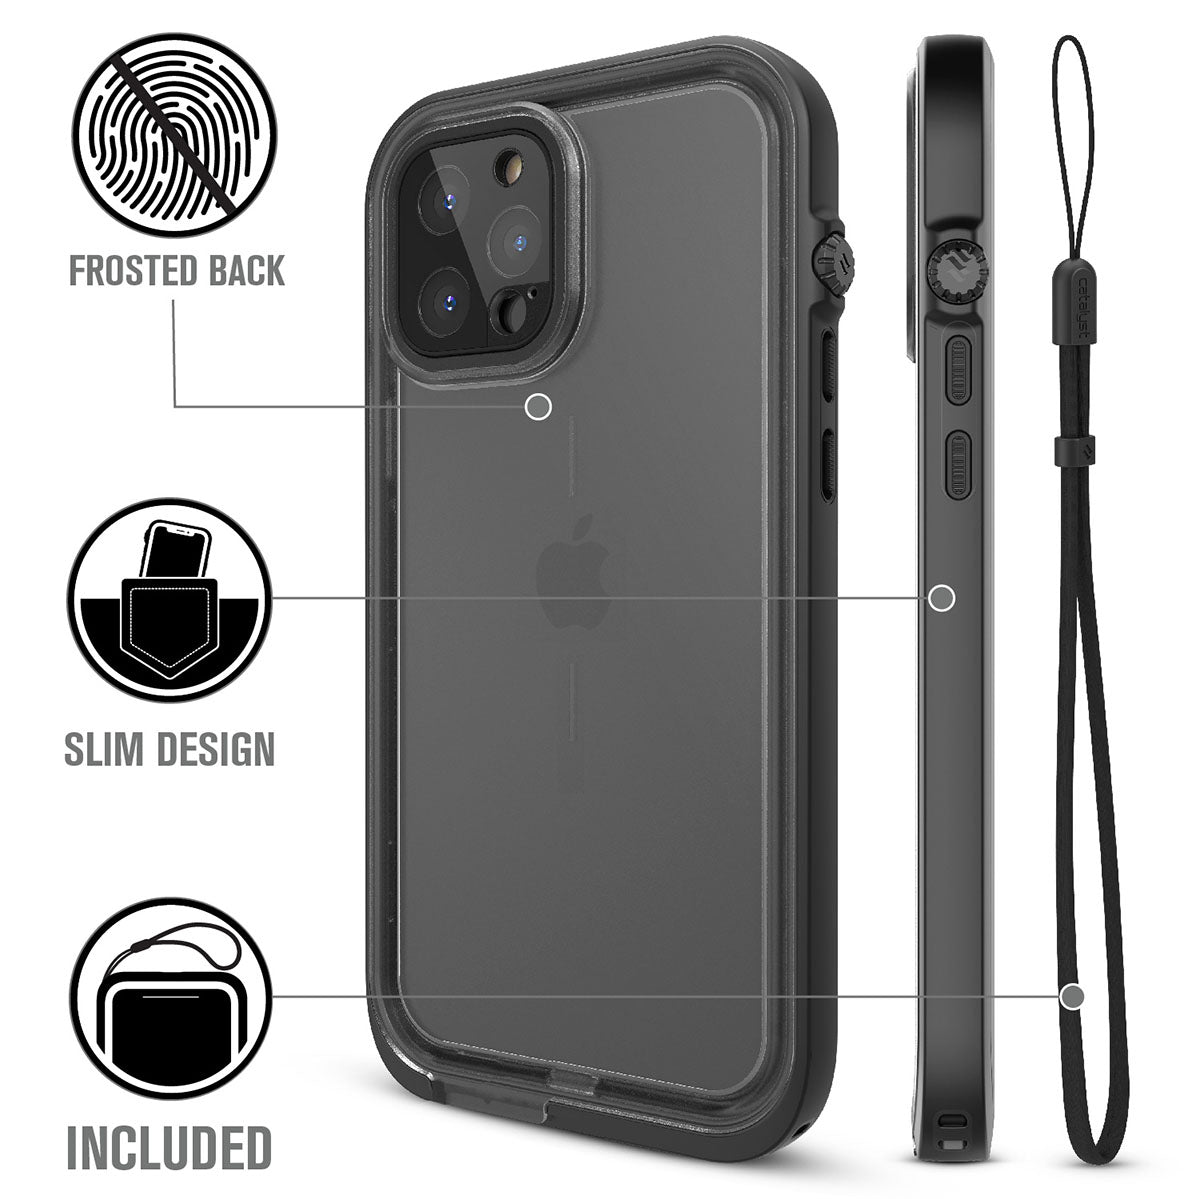 Catalyst iPhone 12 Pro Max waterproof case total protection drop proof water proof front back case with lanyard Text readsfrosted back slim design